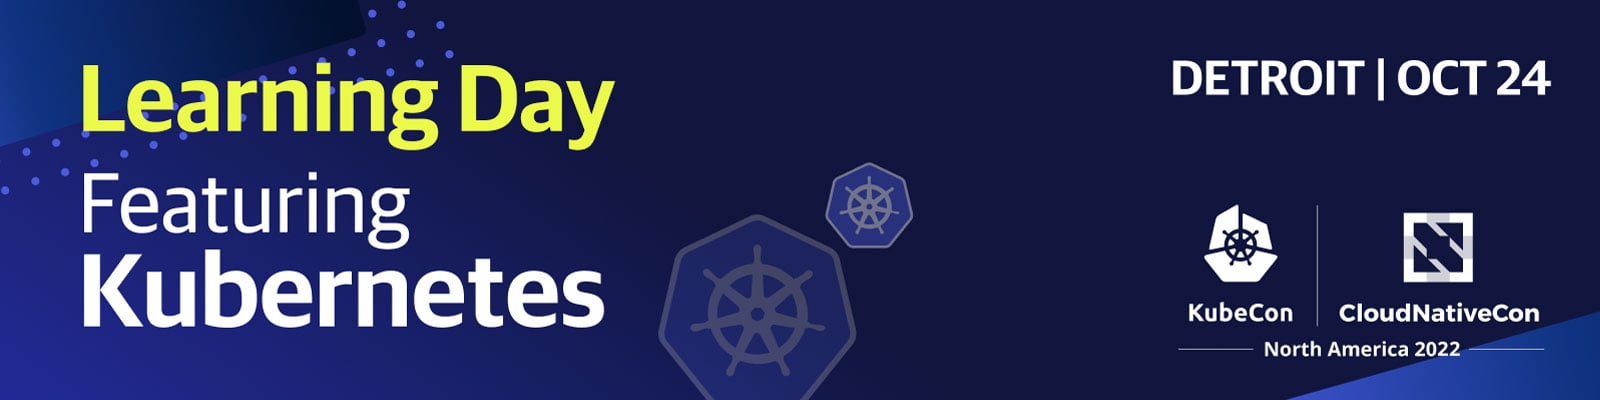 Skinny_-_Learning_Learning_Day_Featuring_Kubernetes_6